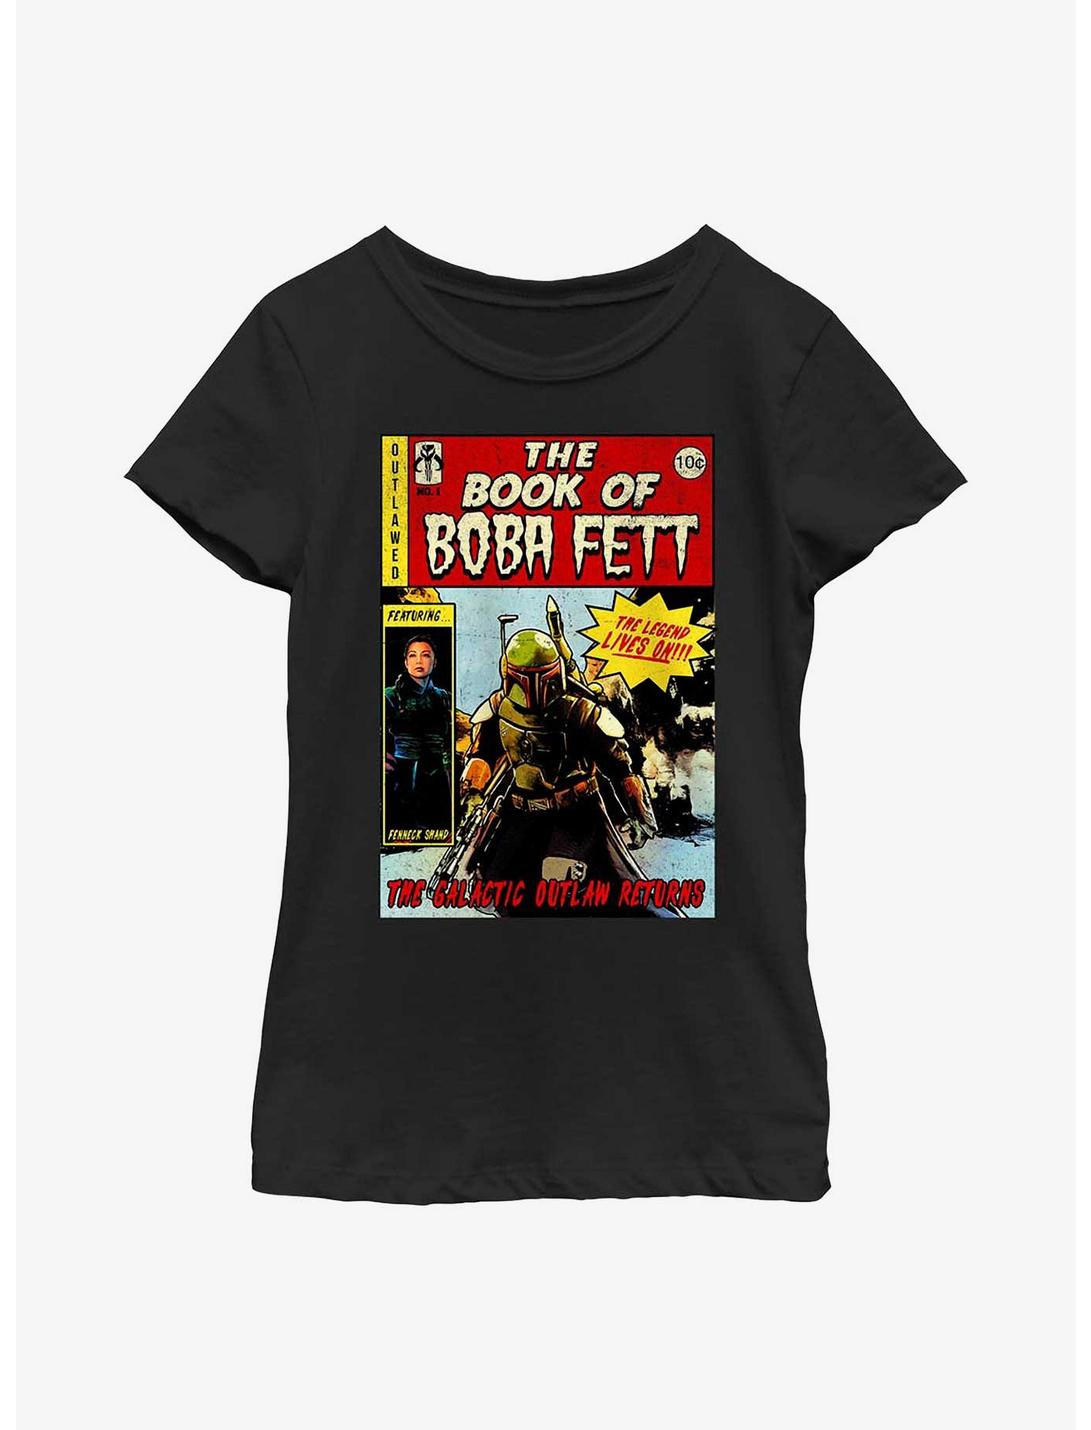 Star Wars: The Book Of Boba Fett Comic Book Cover Youth Girls T-Shirt, BLACK, hi-res